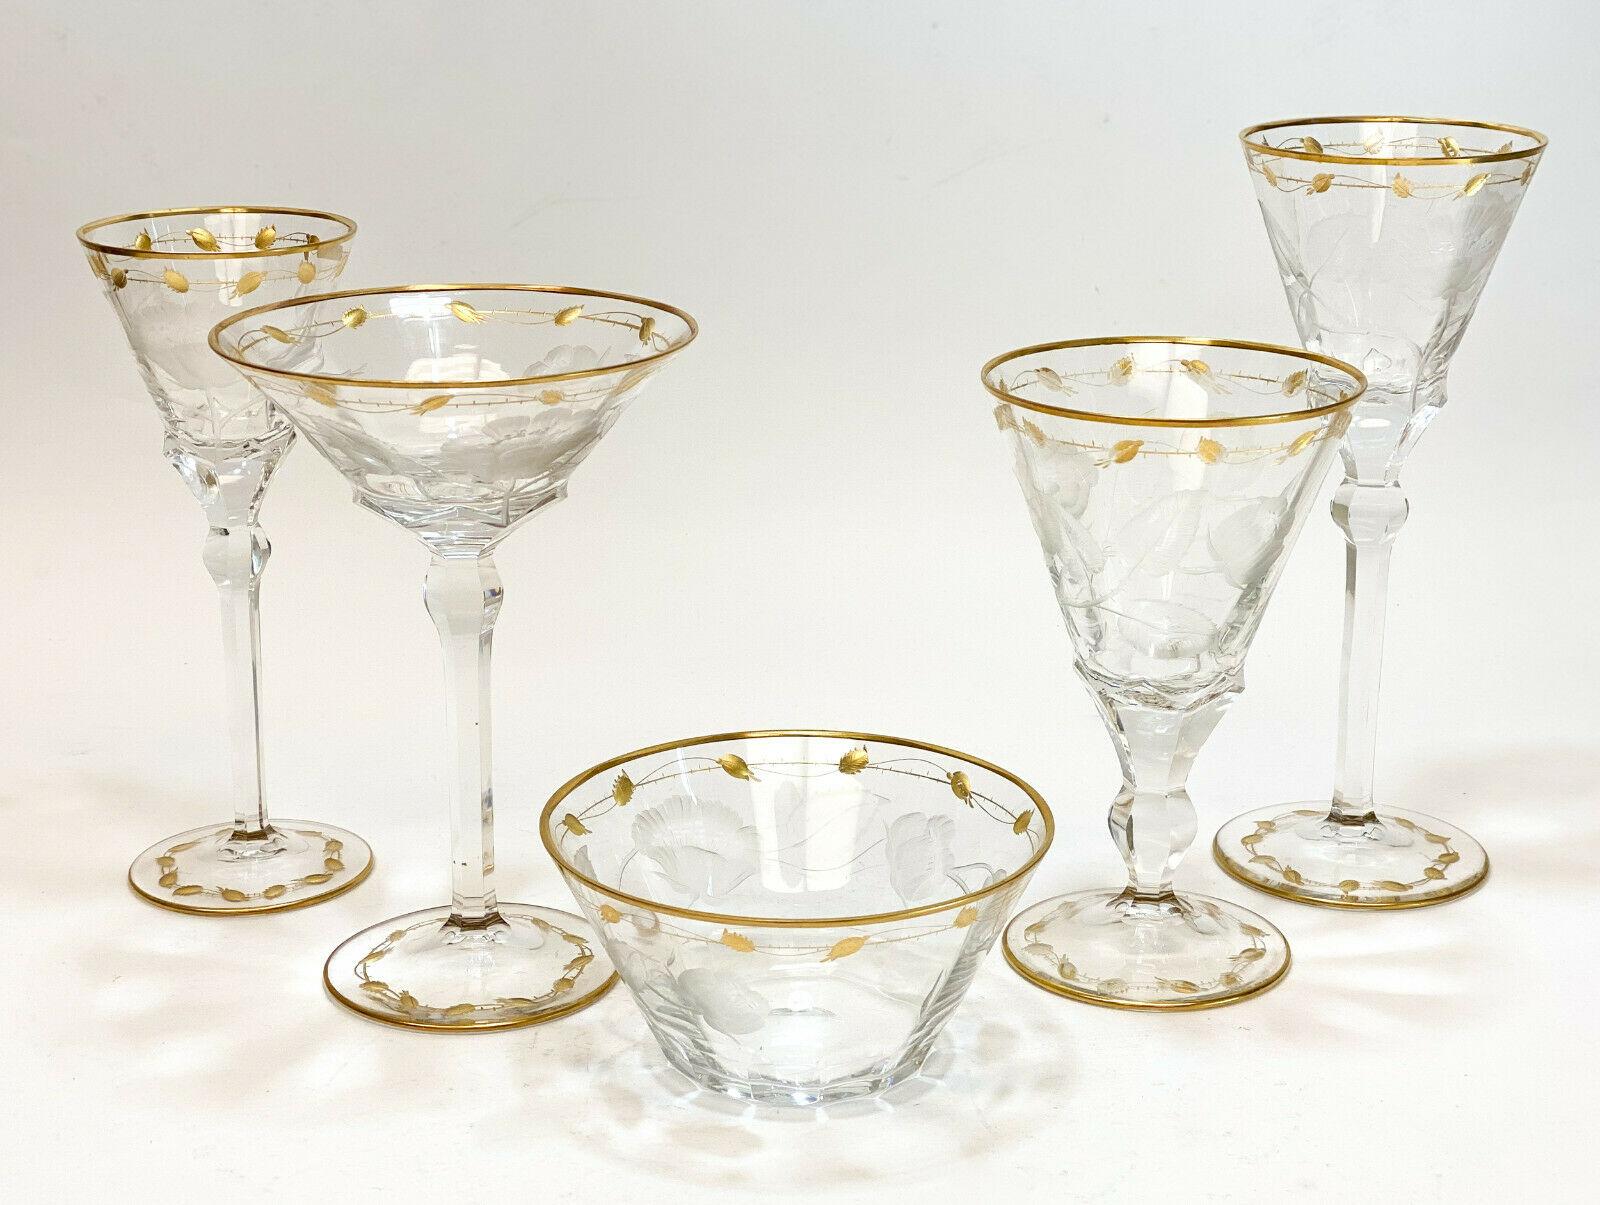 30-piece Moser cut glass and gilt drink-ware service goblets in Paula service for 6. Cut floral designs with a multi-sided stem. Gilt to the rims with leaf swags.

The service includes:
- 6 small wine goblets
- 6 claret wine goblets
- 6 martini